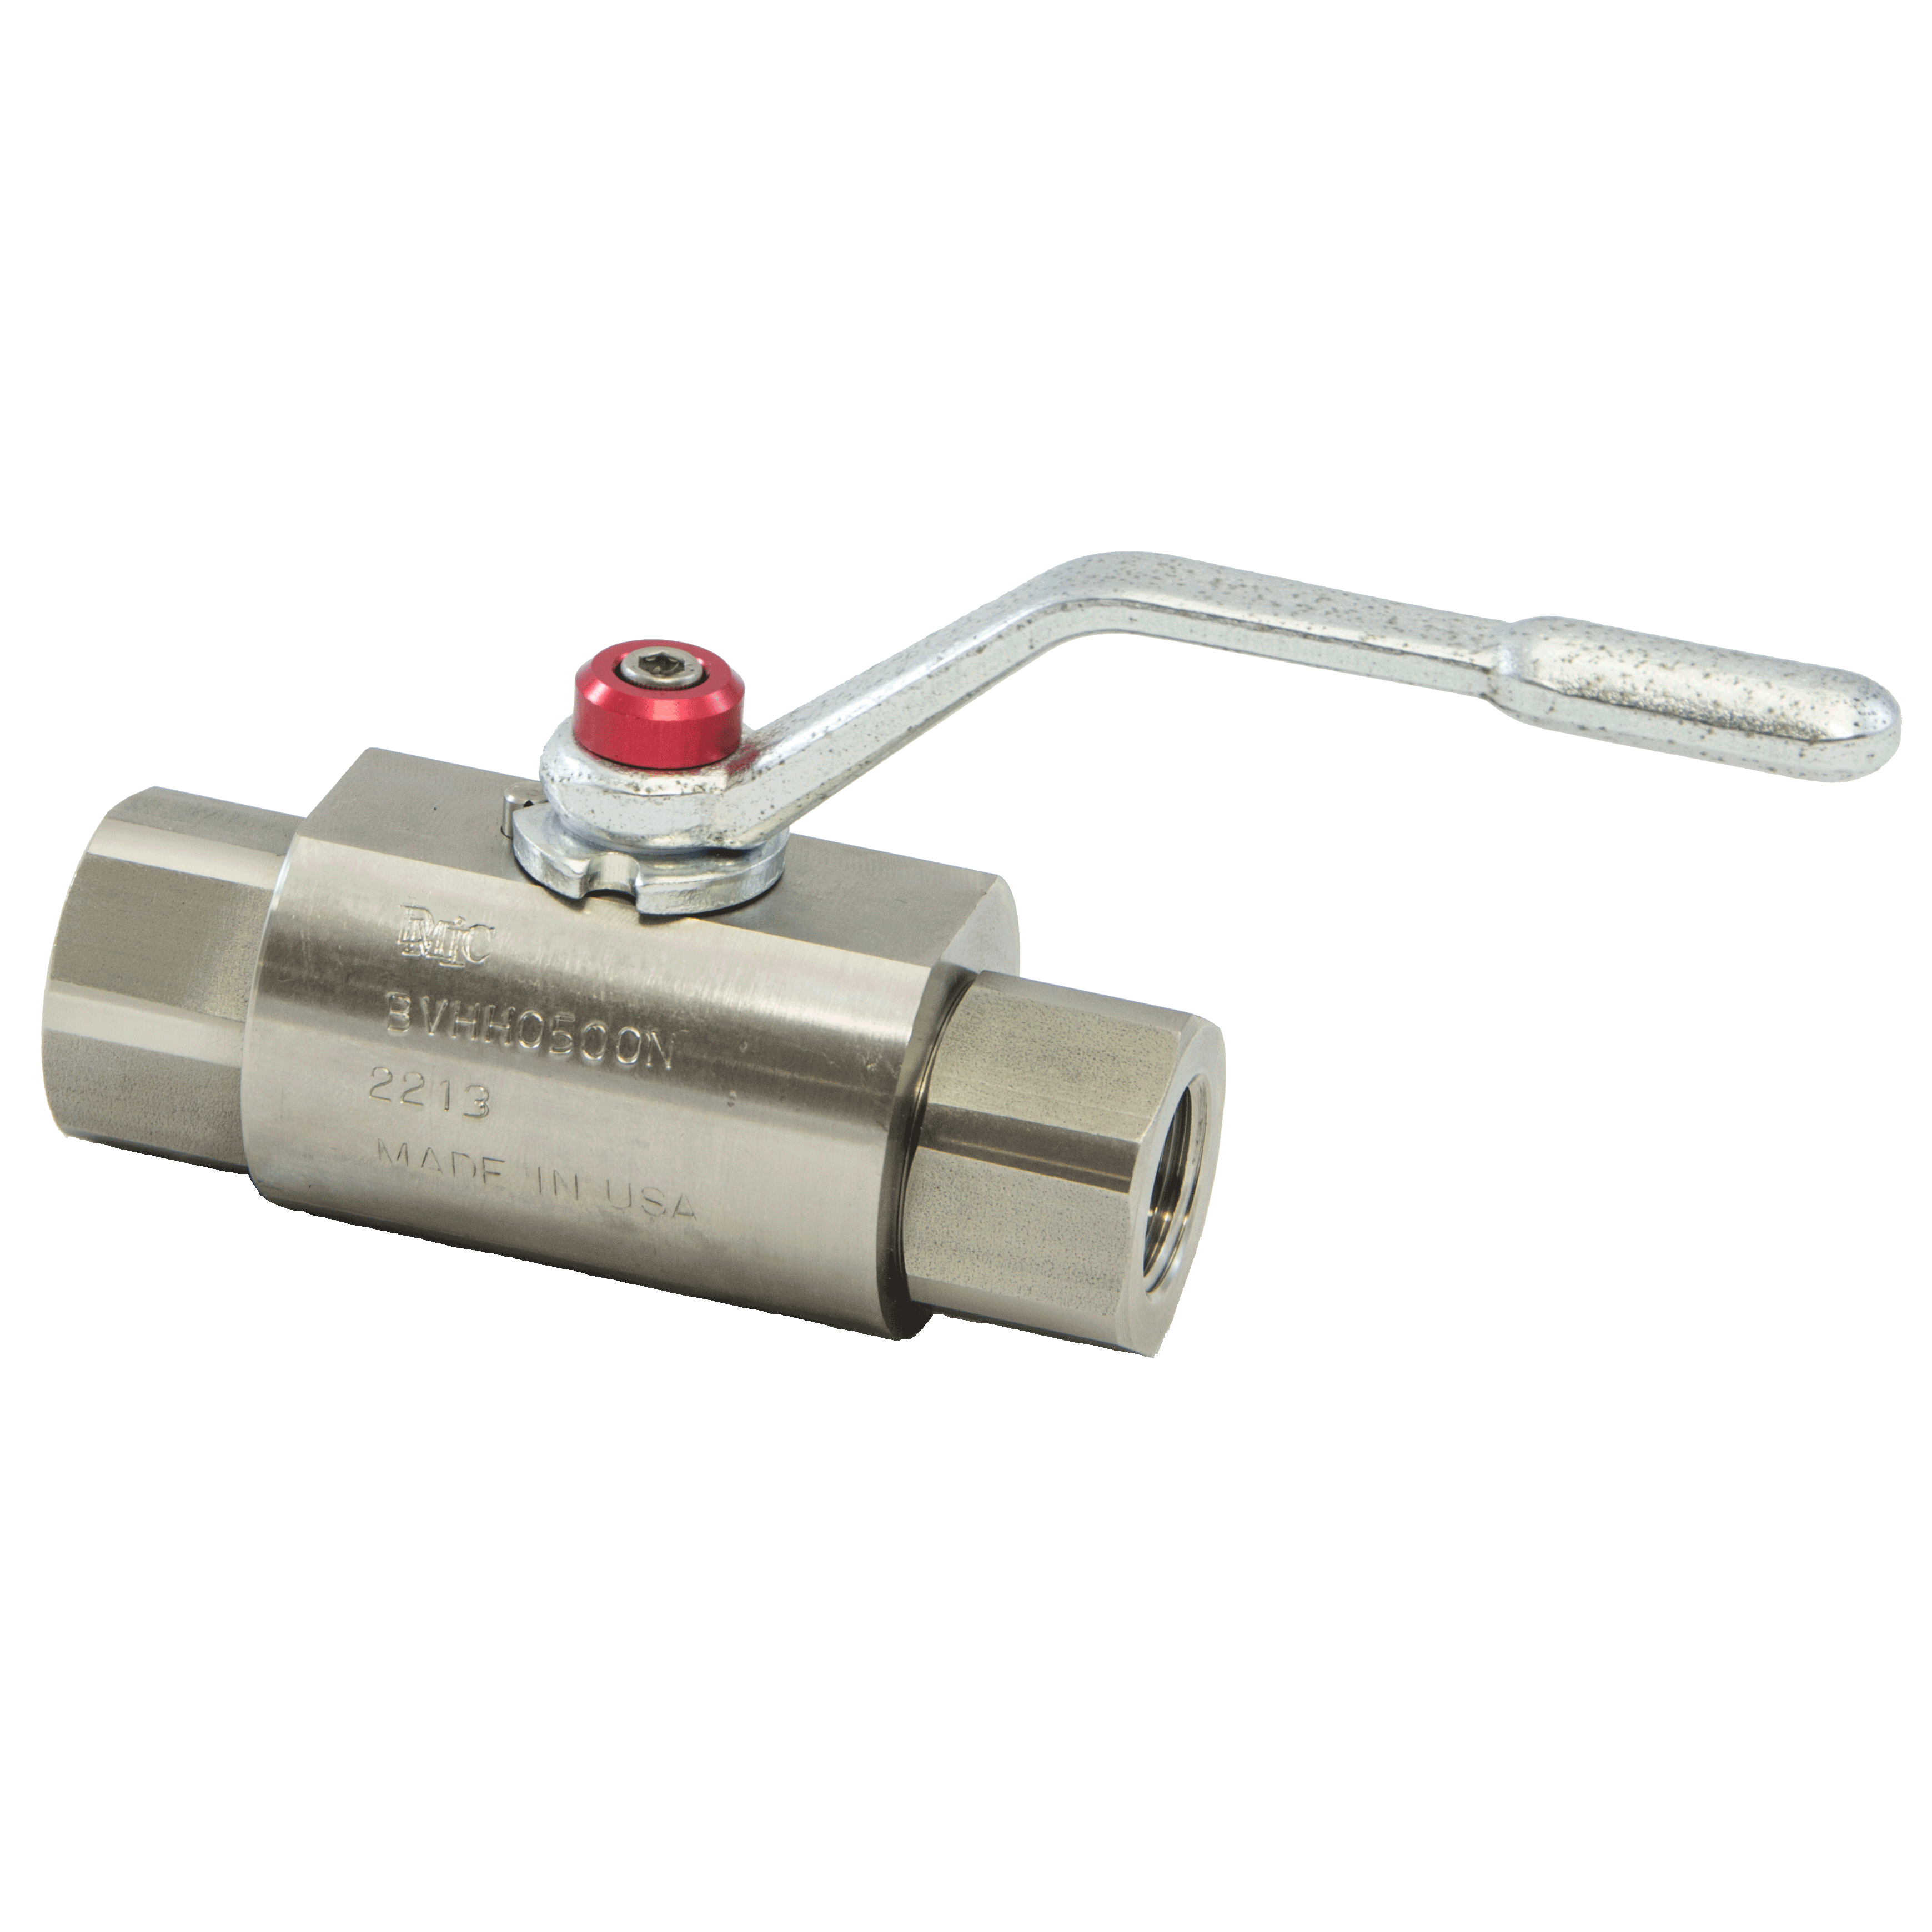 BVHH-2000S-1111 : DMIC Super High Pressure Ball Valve, #32 SAE (2), Carbon Steel, 10000psi, Two-Way